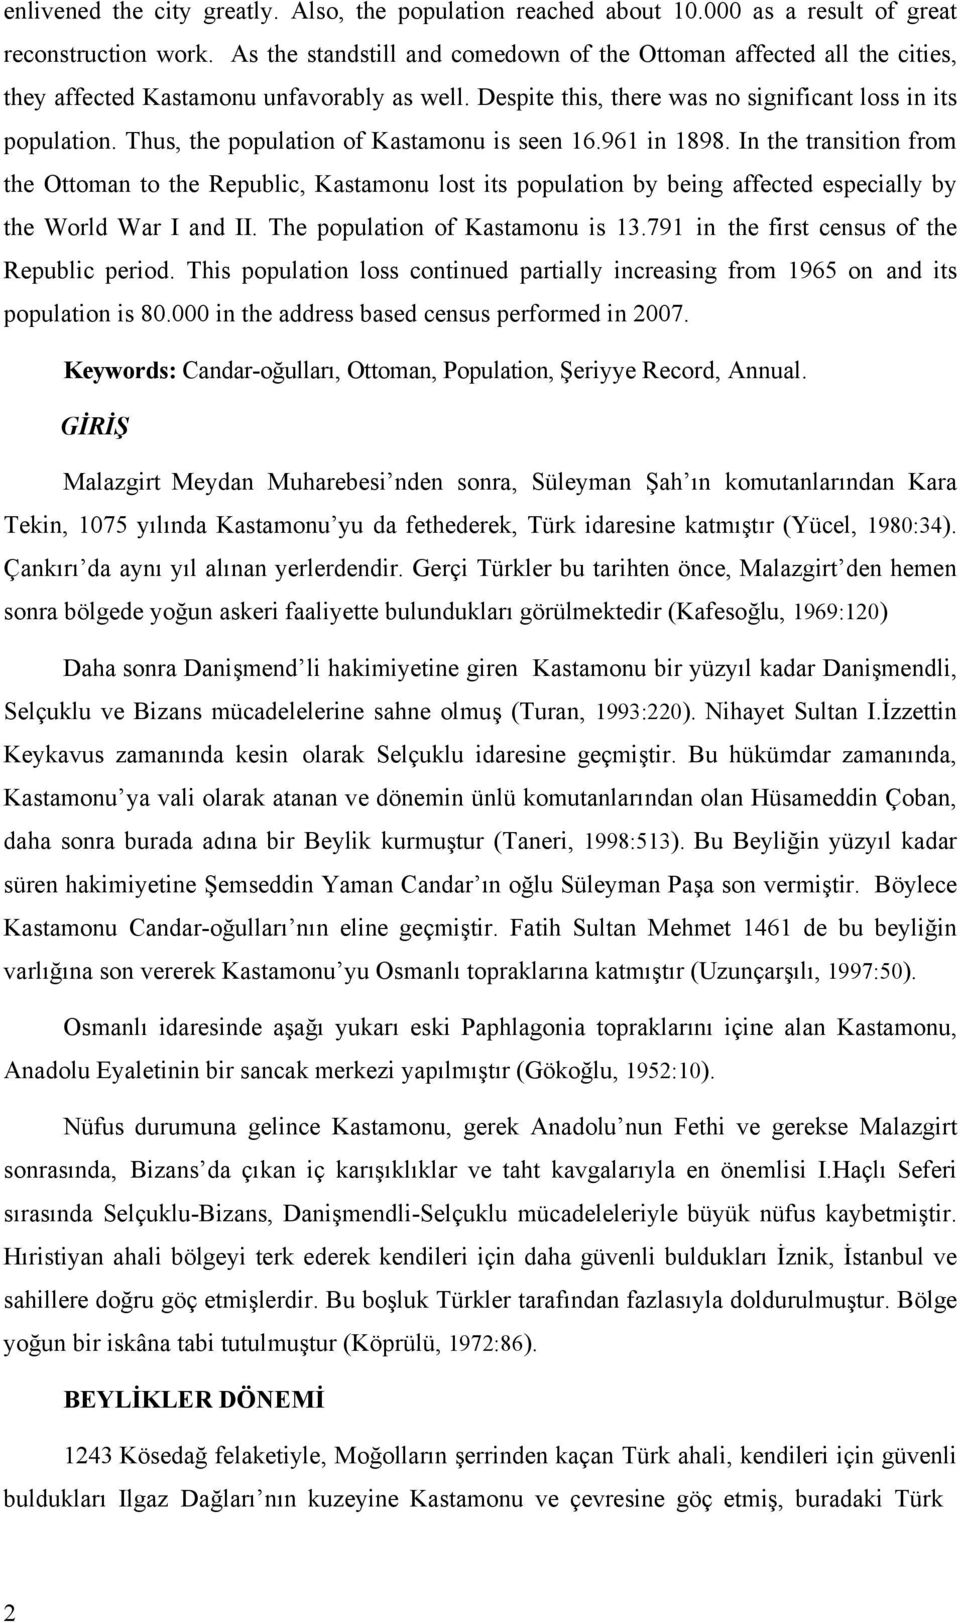 Thus, the population of Kastamonu is seen 16.961 in 1898. In the transition from the Ottoman to the Republic, Kastamonu lost its population by being affected especially by the World War I and II.